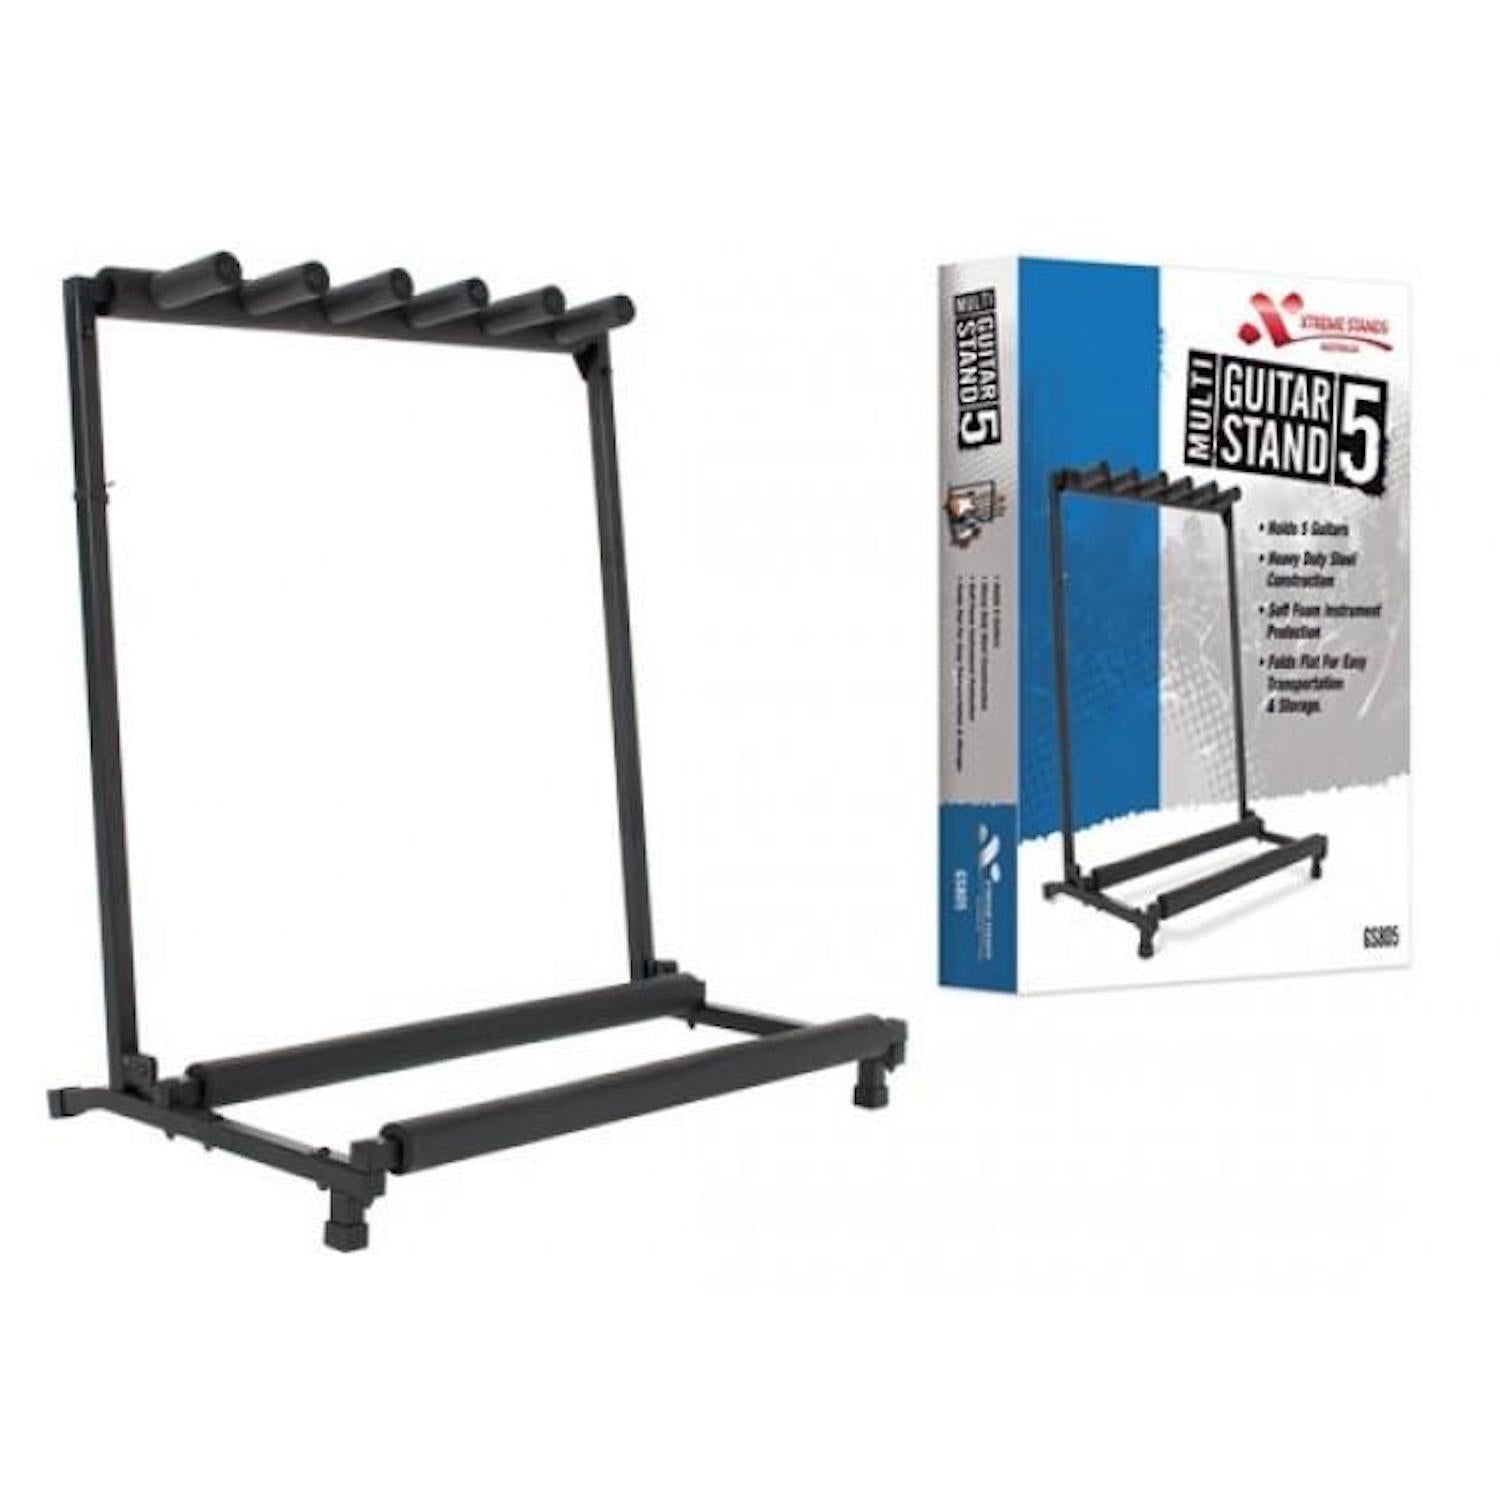 Xtreme GS805 5 Multi Rack Guitar Stand